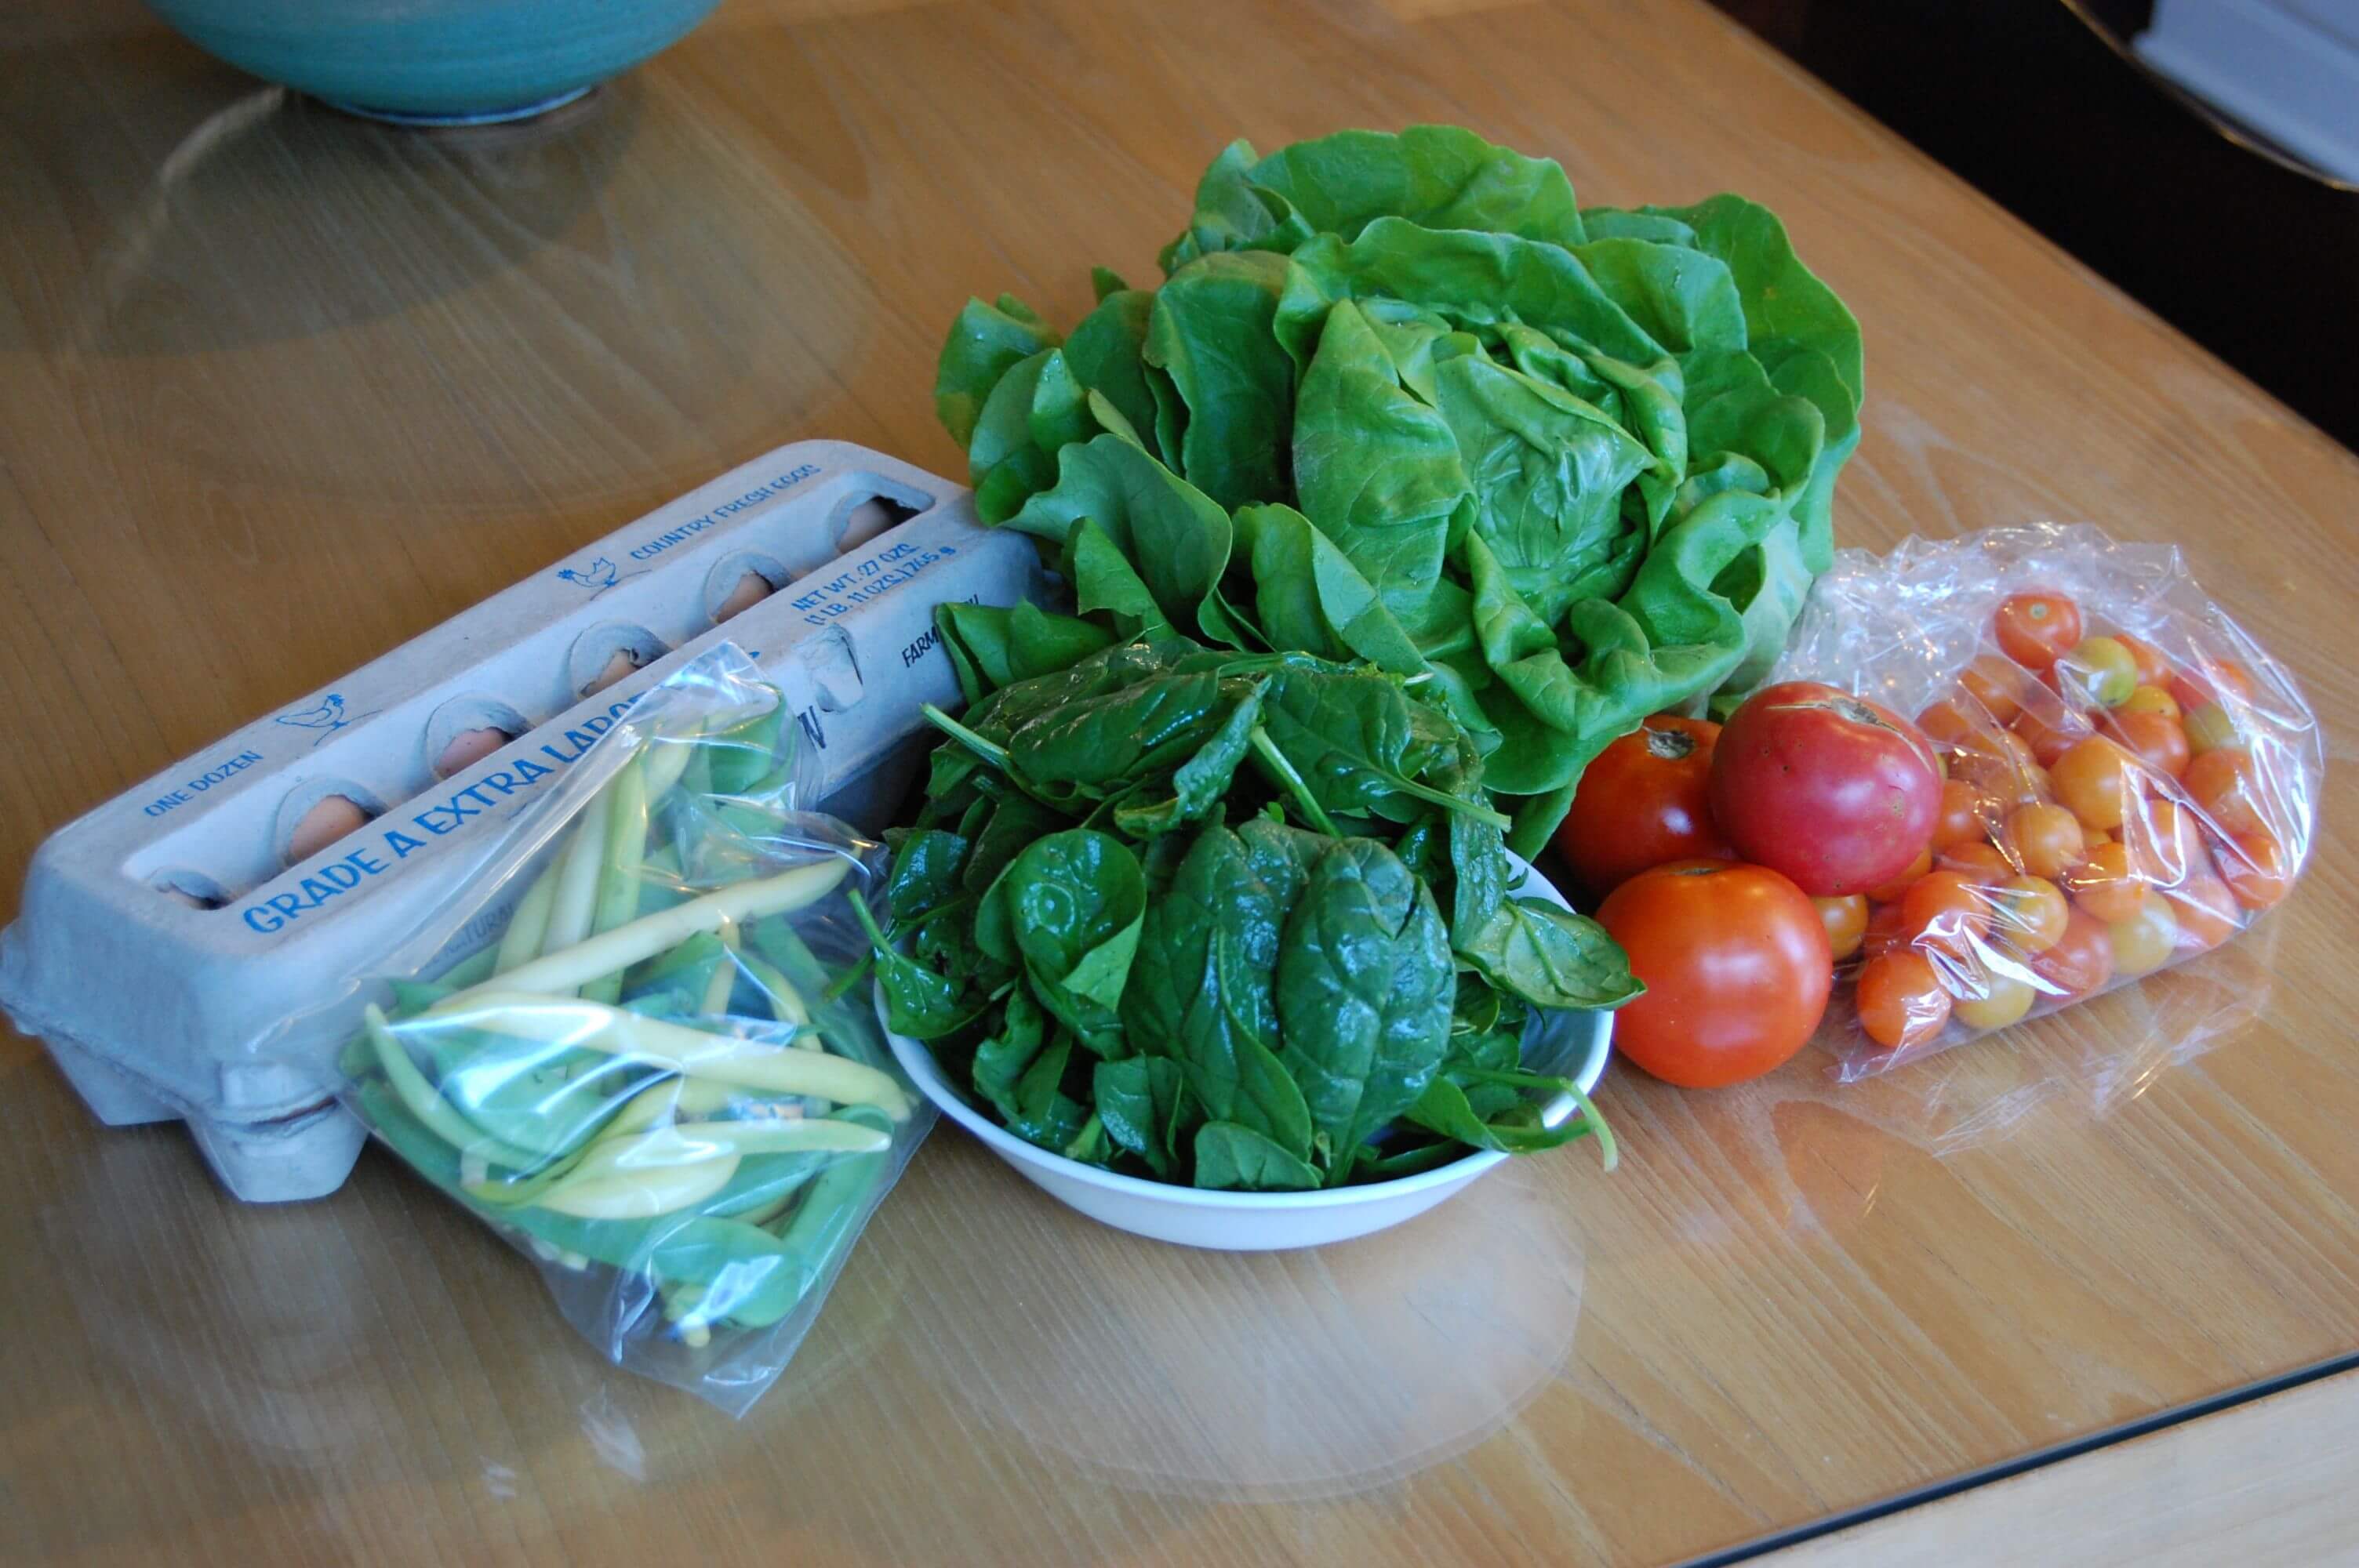 Fresh produce from the farmers market that includes eggs, lettuce, spinach, tomatoes, and green beans. 